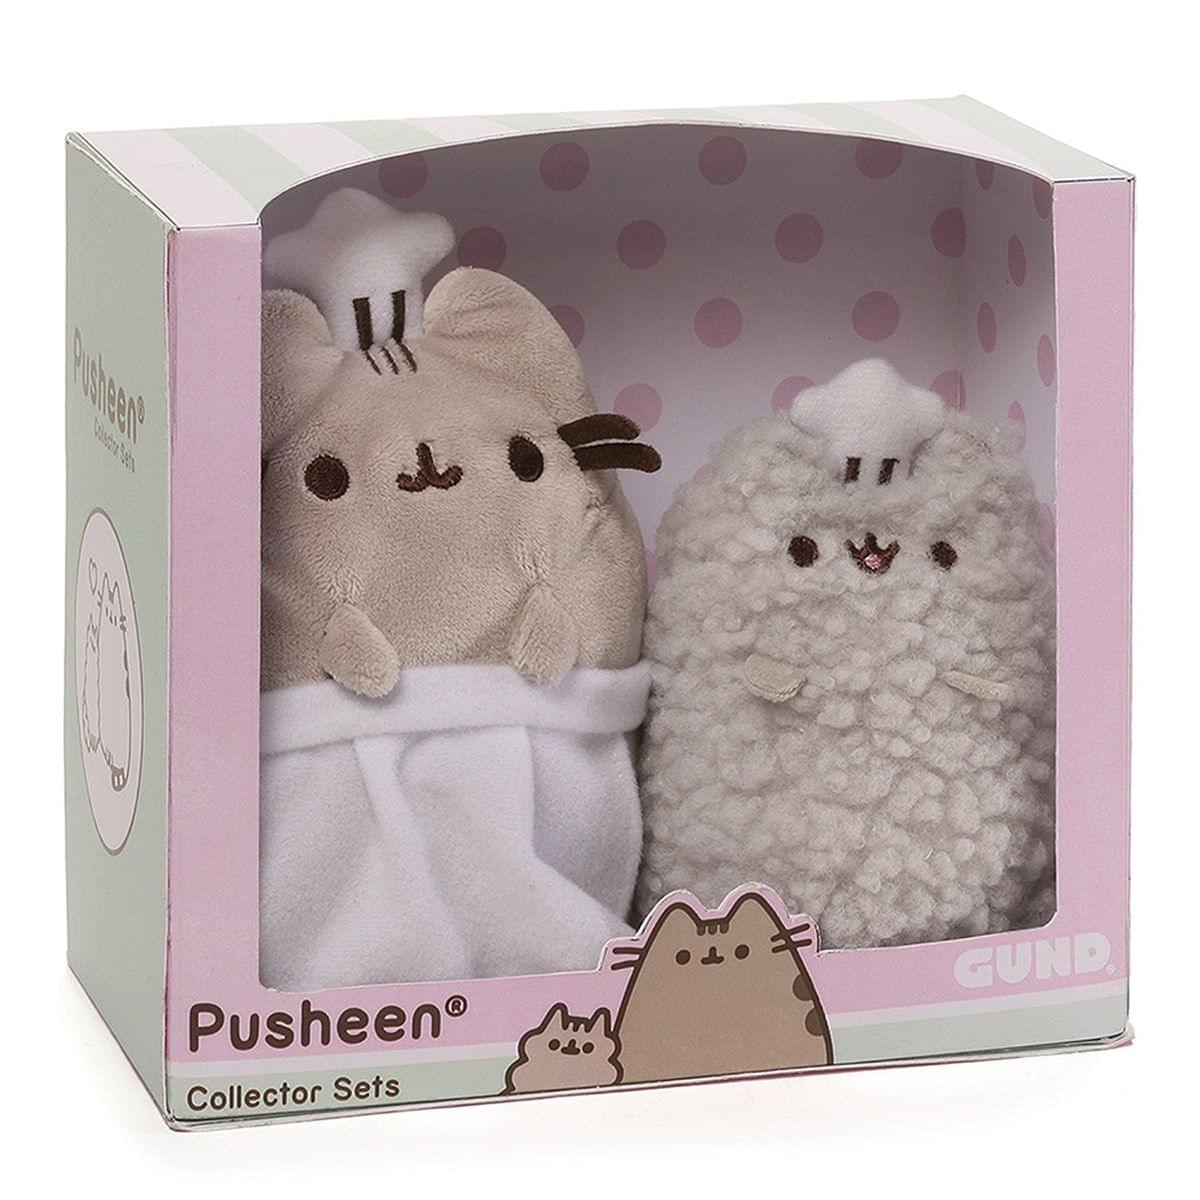 Pusheen and Stormy Baking Collector Set 8.5" Plush